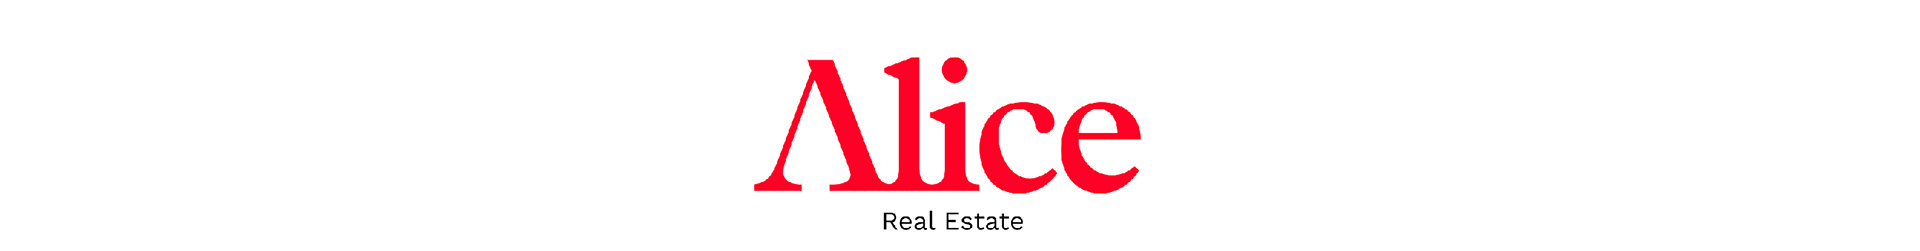 ALICE REAL STATE WEB SITE